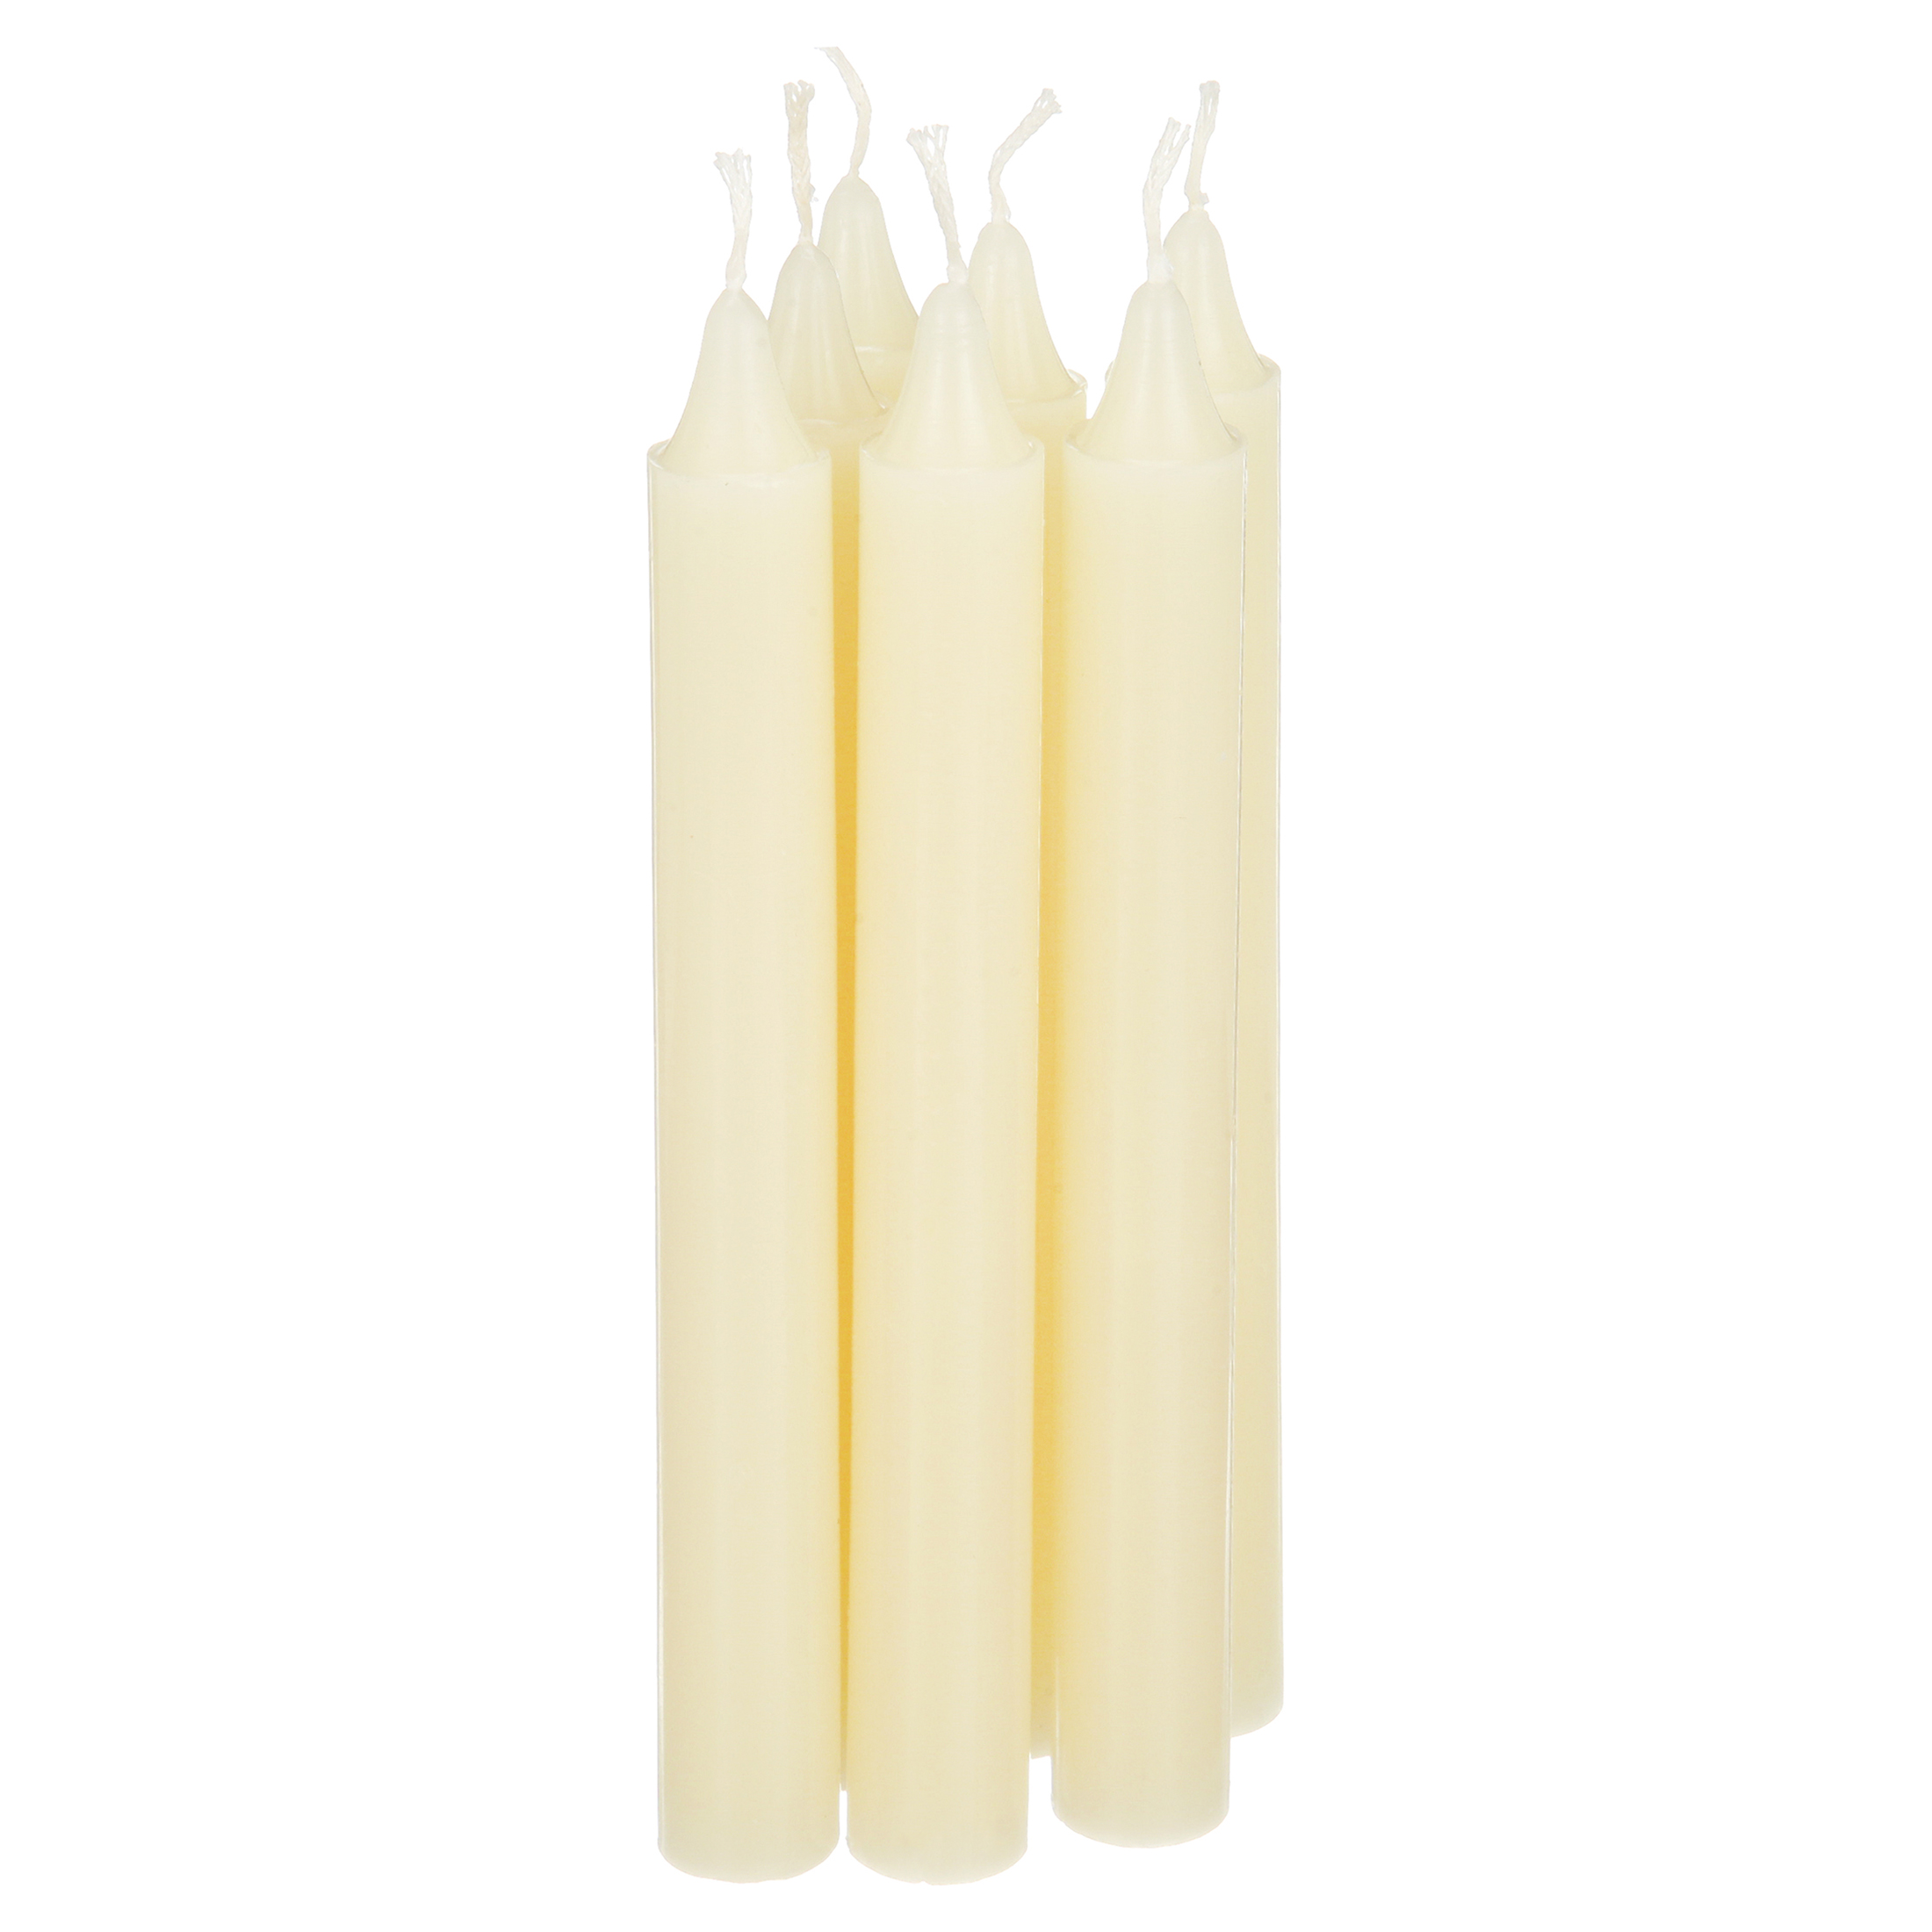 Taper Candles: 7 Inches Ivory Taper Candles, 7 Pack - image 3 of 7